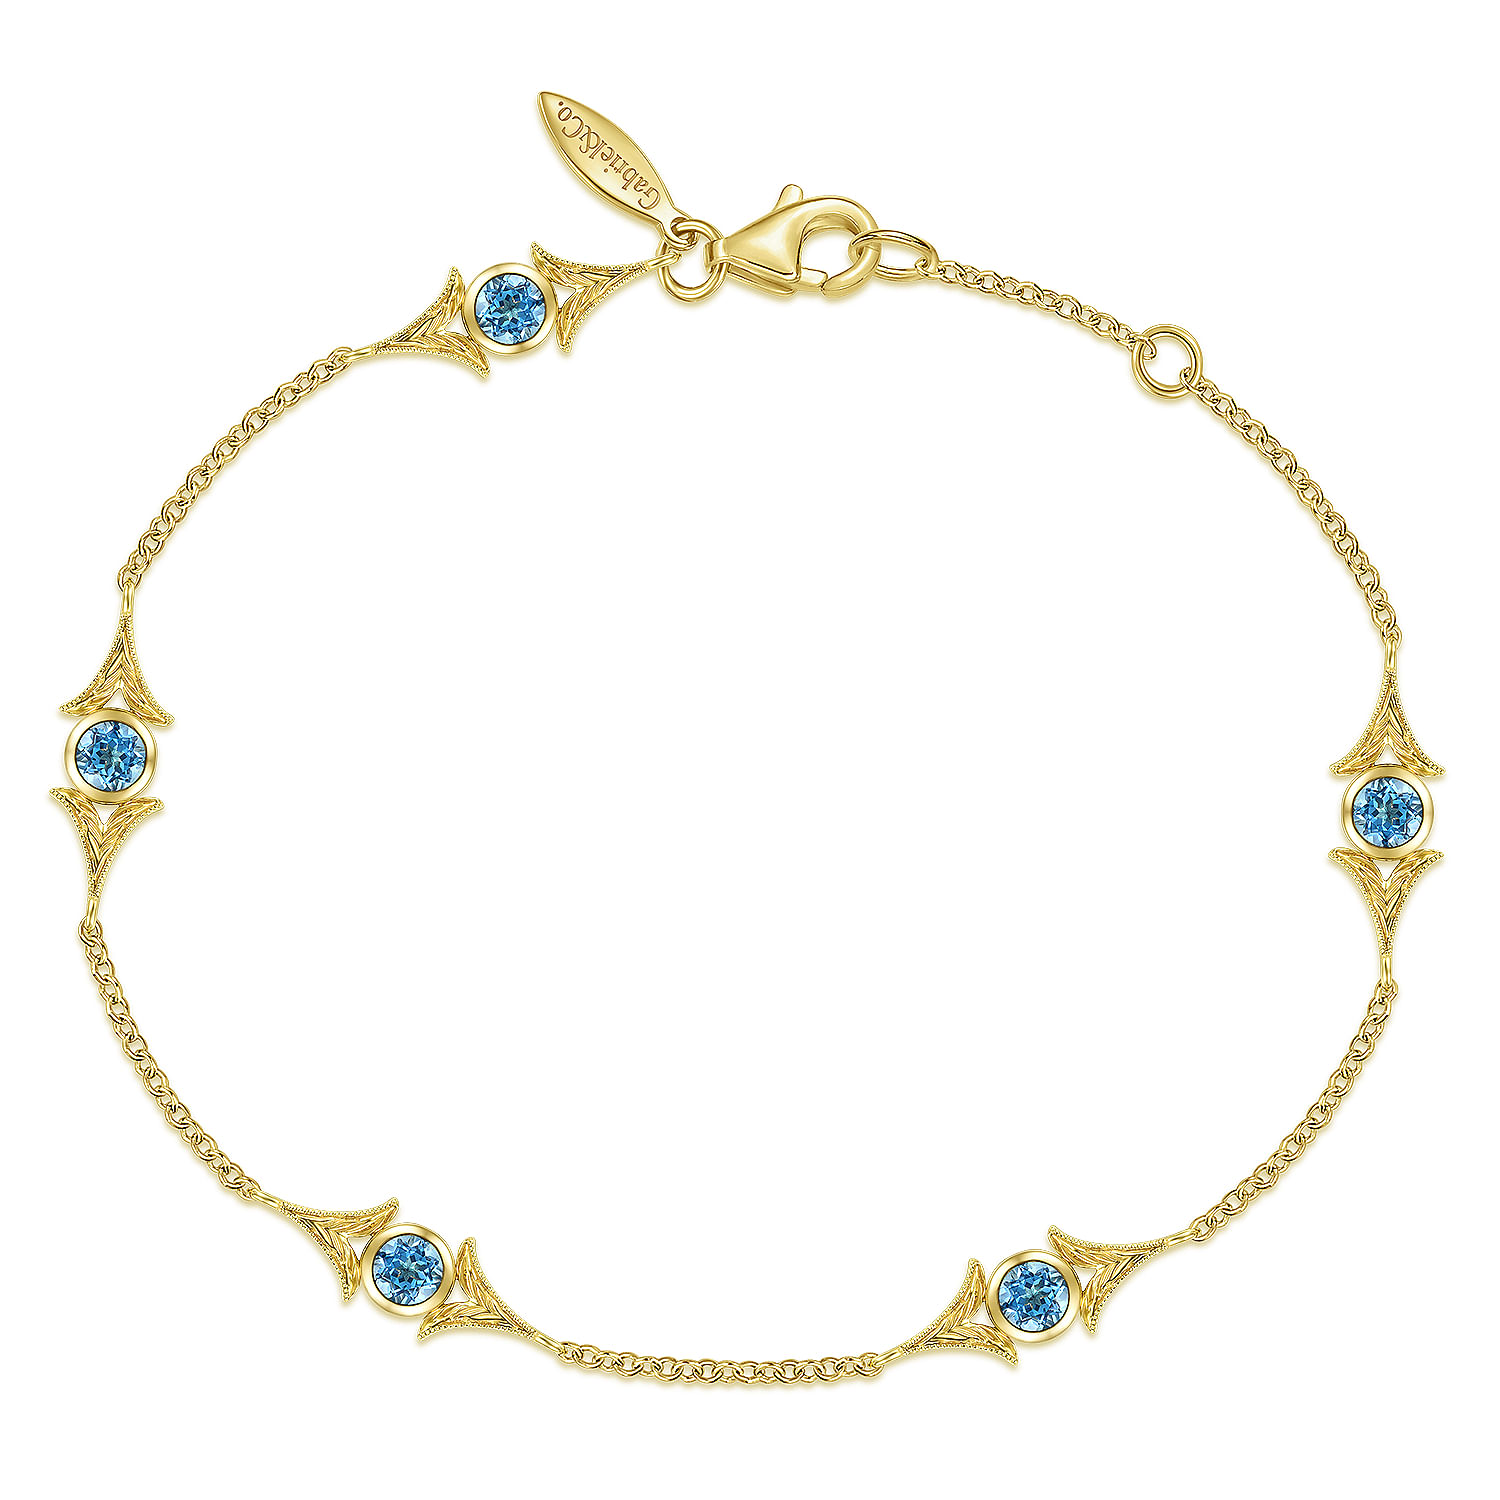 14K Yellow Gold Chain Bracelet with Blue Topaz Triangle Stations